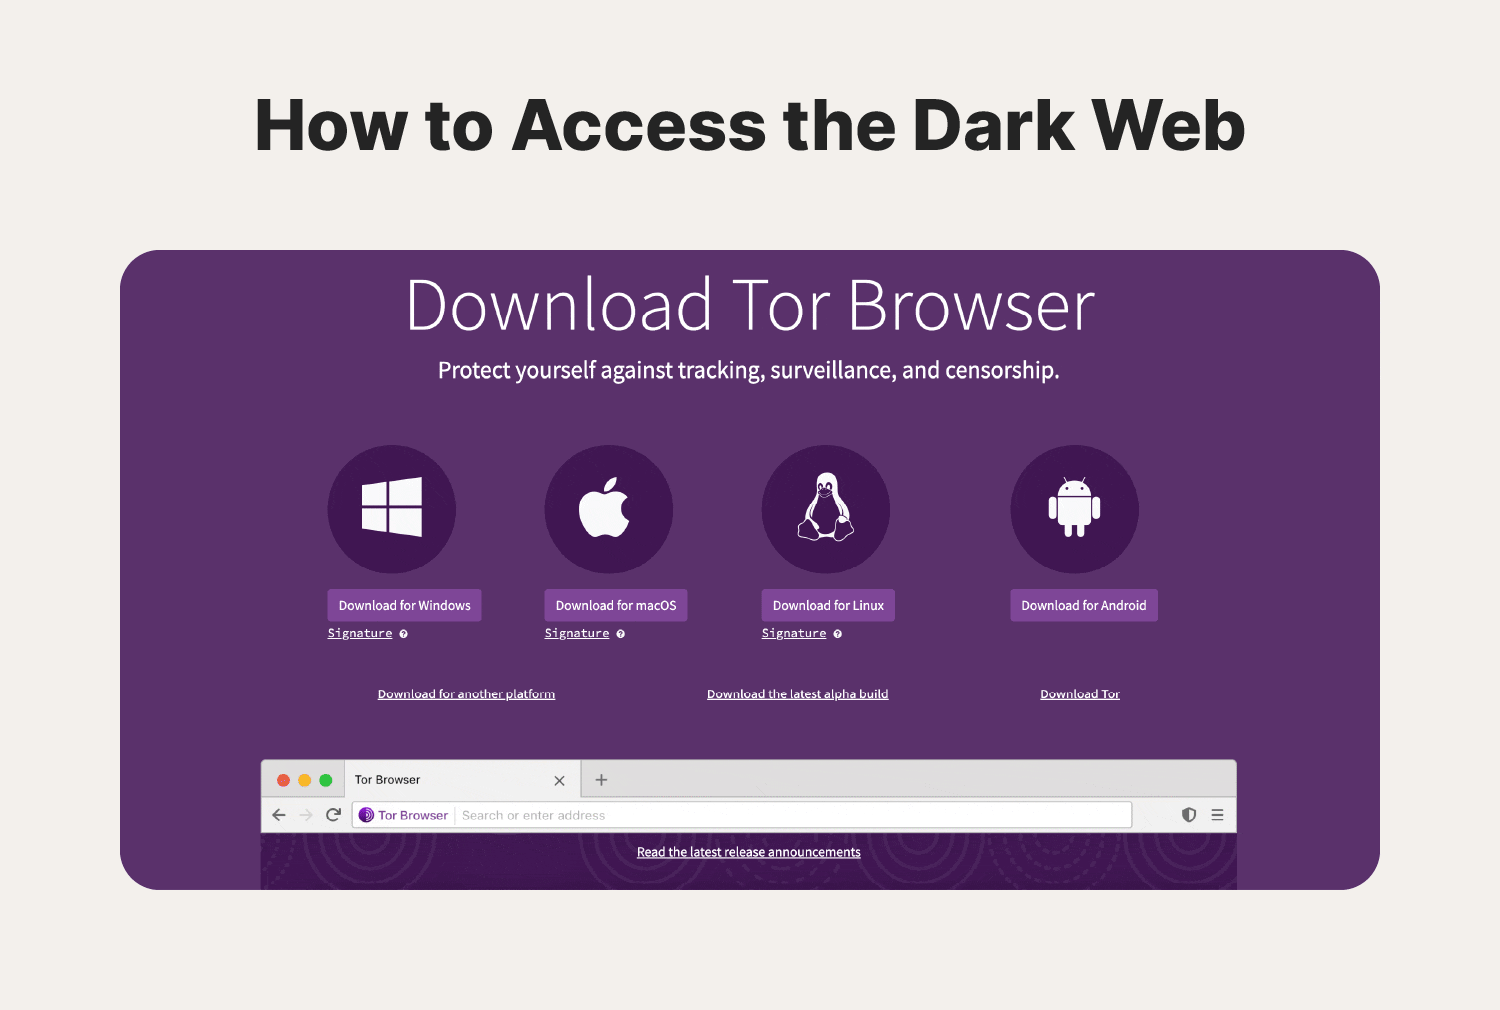 An overview of how to access the dark web.